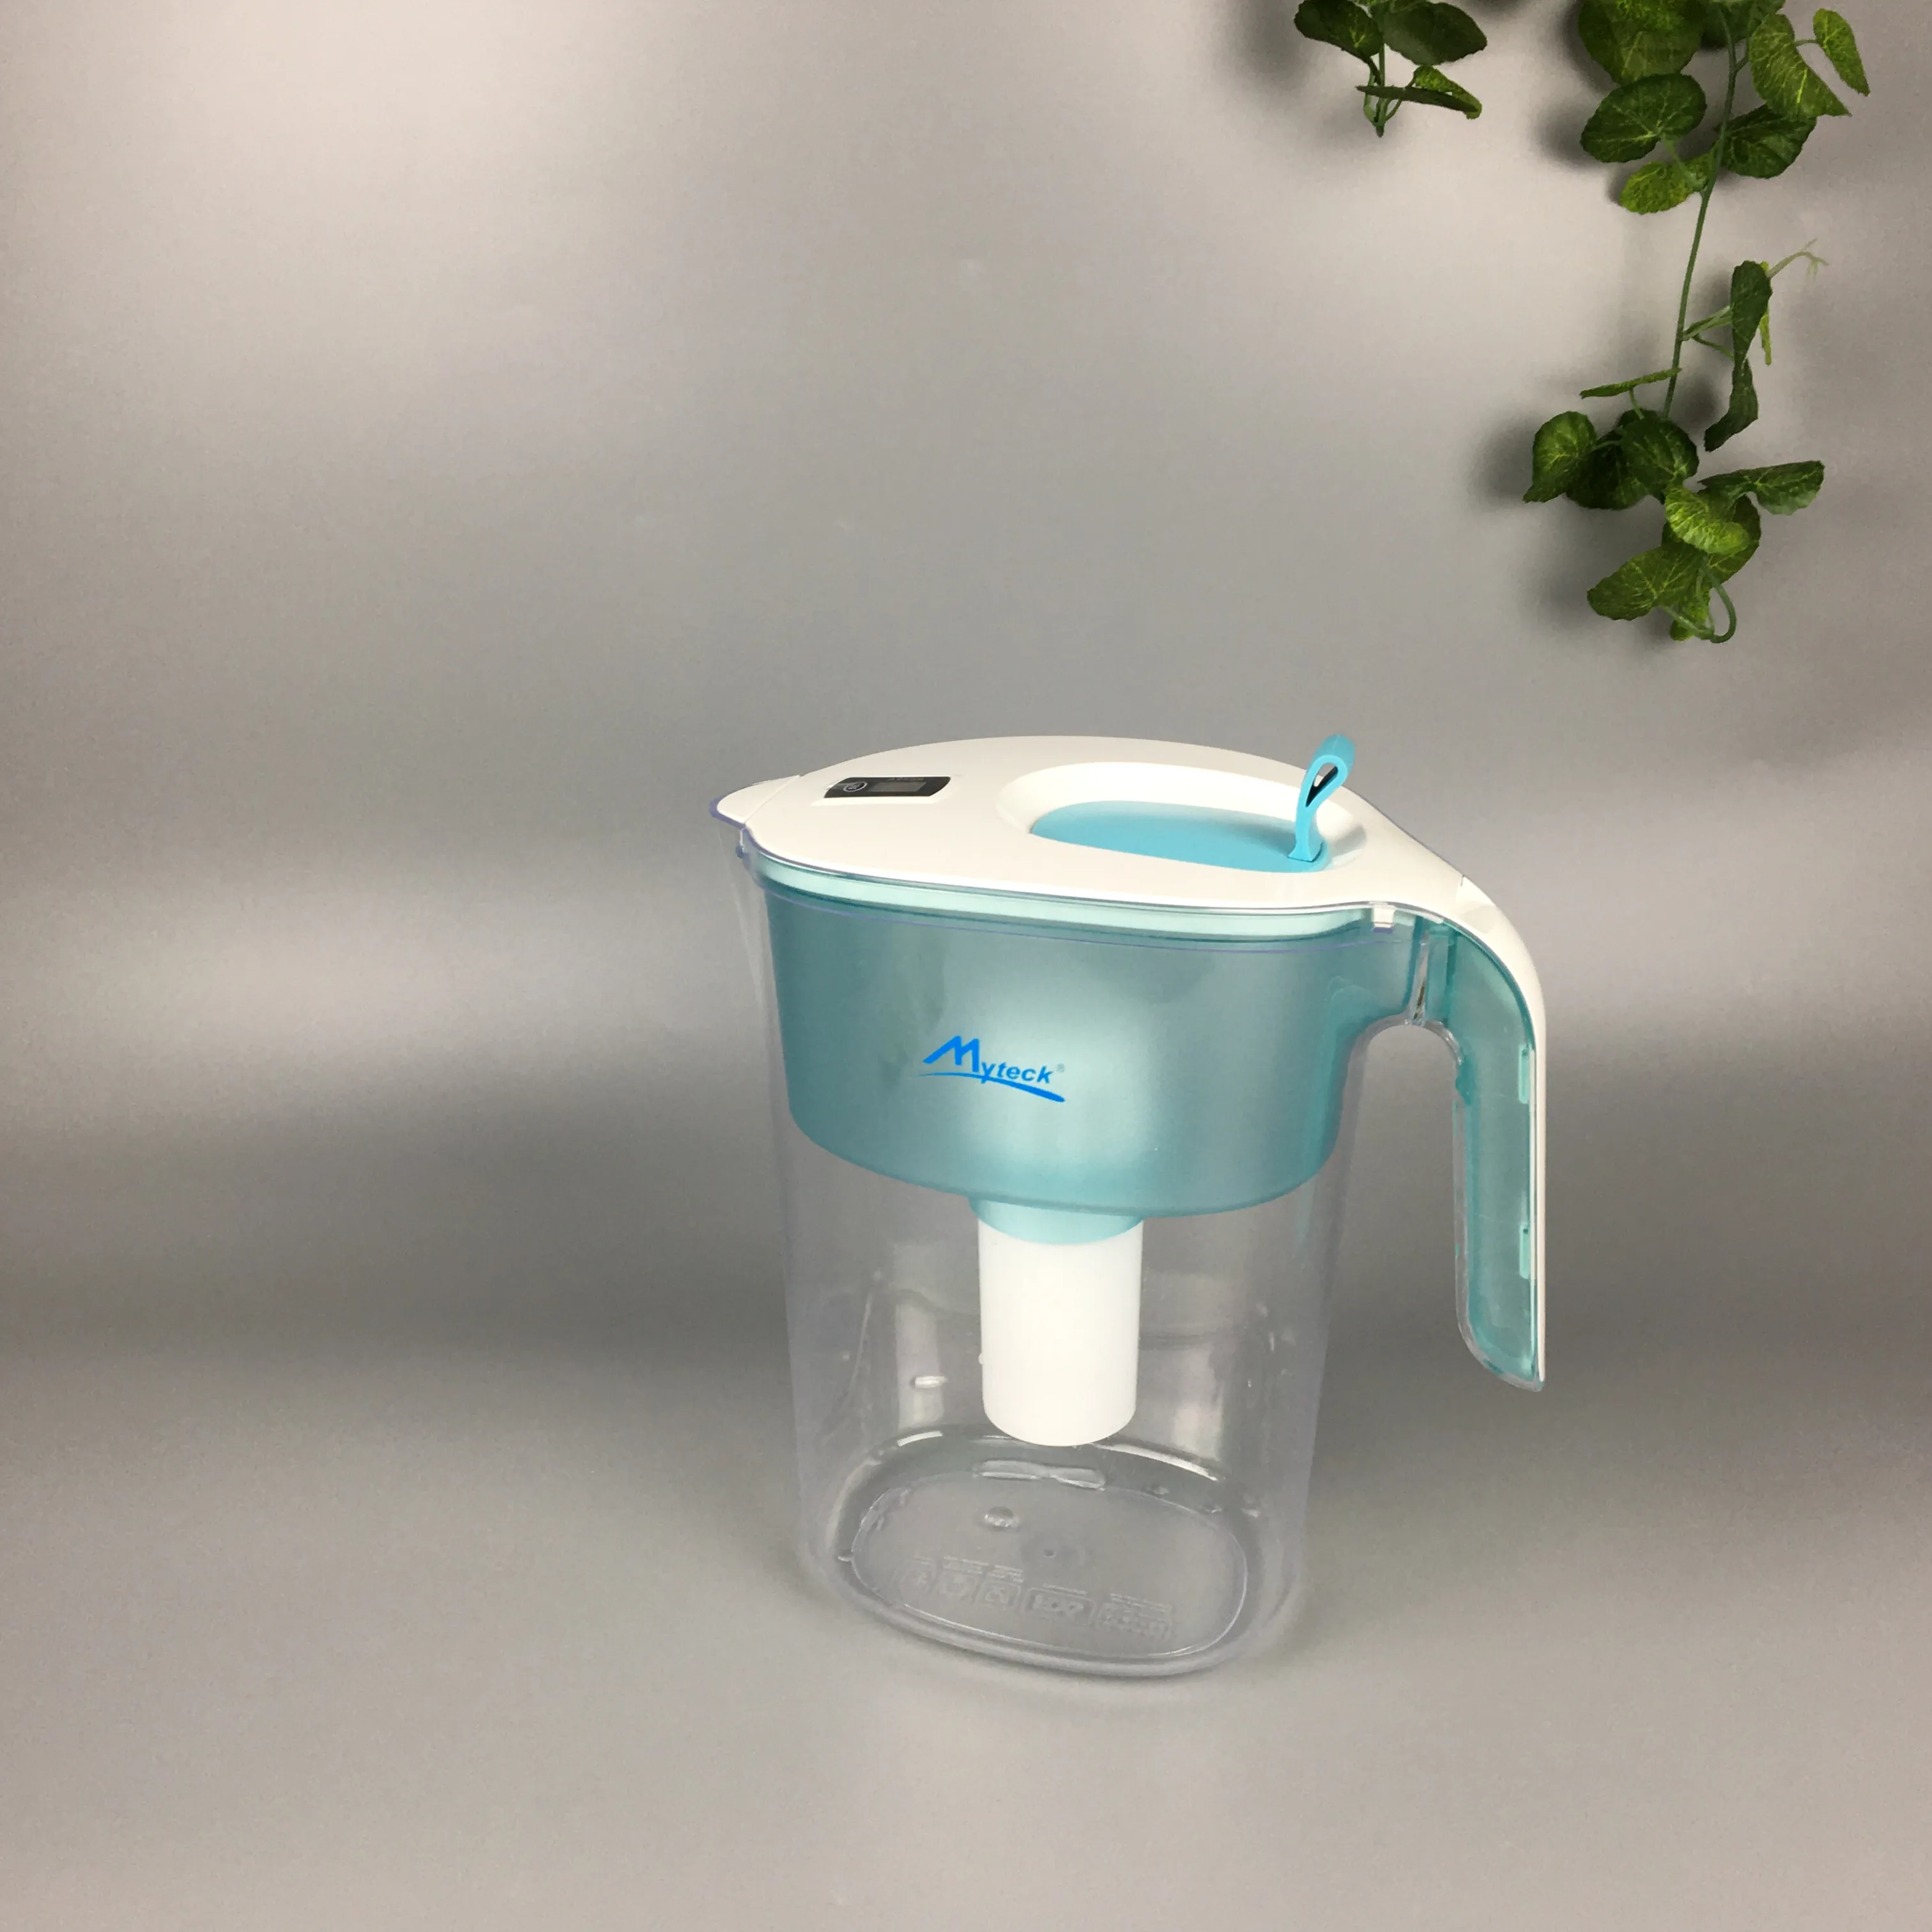 Myteck Innovative 4.2L Water Jug Purifier Directly Drinkable Sweet Soft Water Pitcher Filter Bacteria Removing 99.99% for Home